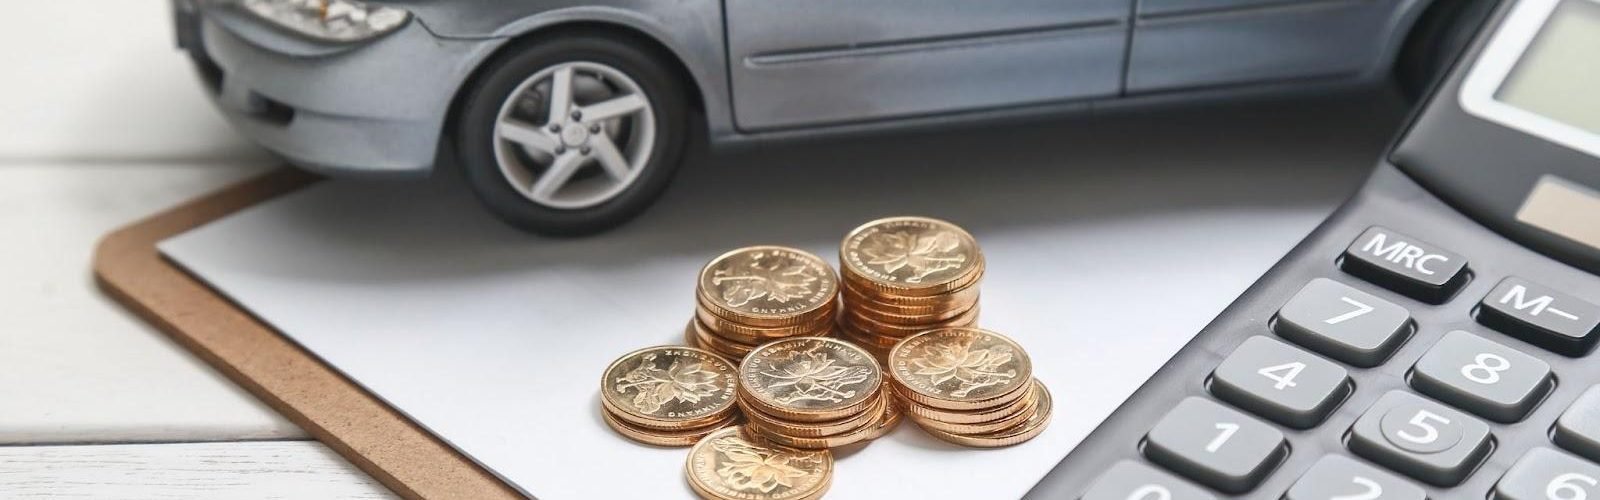 Understanding California’s Cash for Cars State Program and Exploring Alternative Options